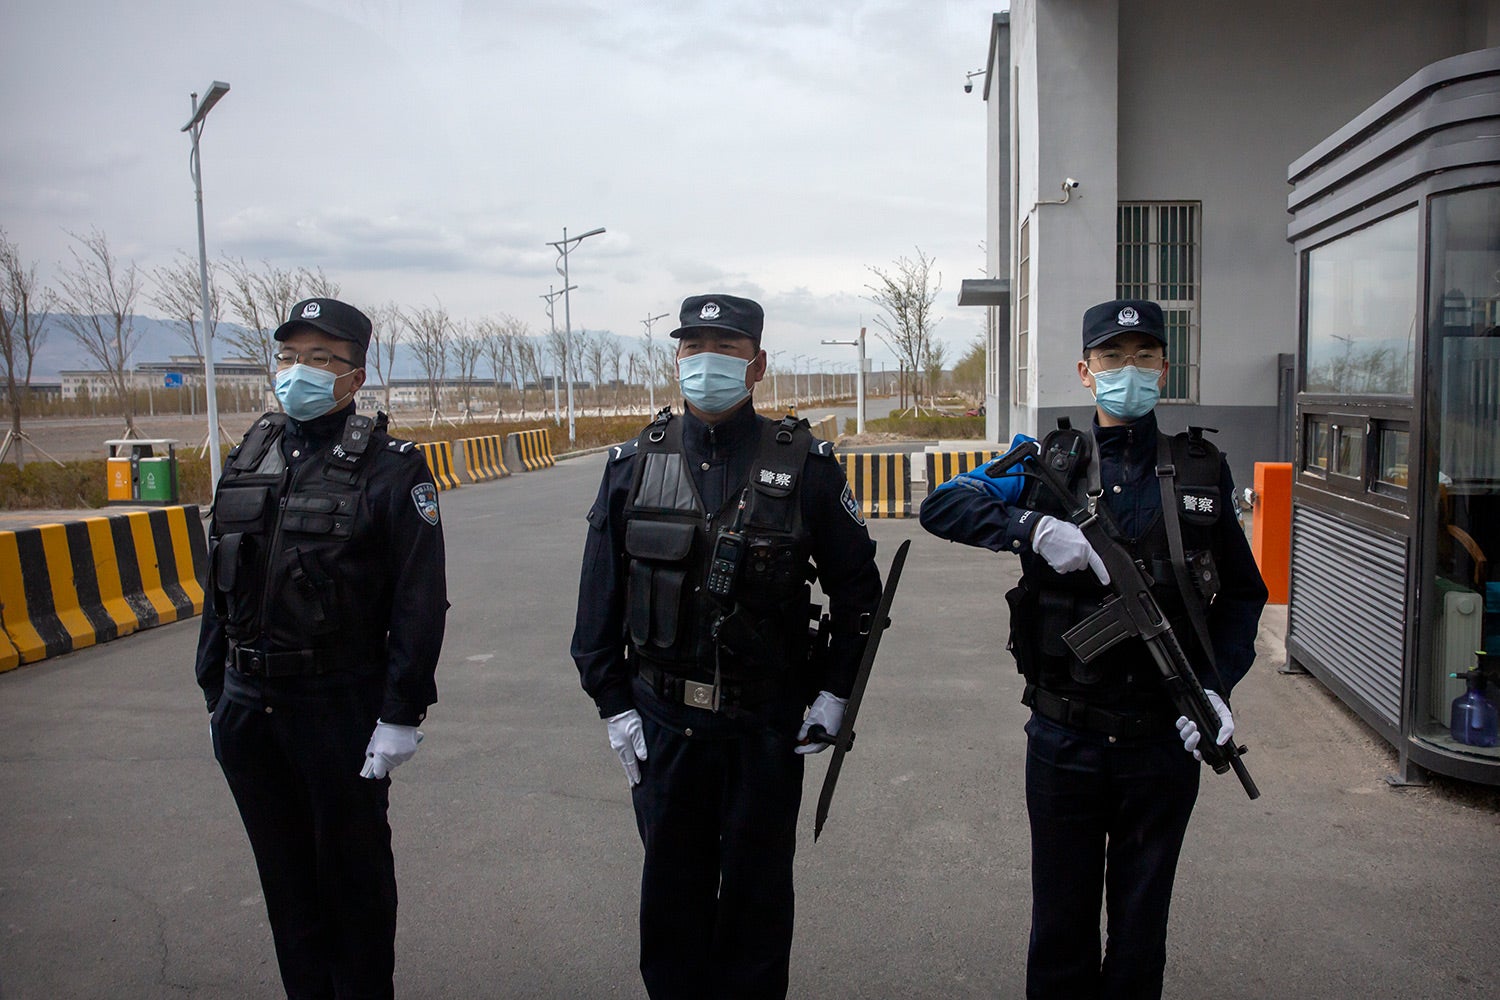 Police officers stand at the outer entrance of the Urumqi No. 3 Detention Center in Dabancheng in western China's Xinjiang region on April 23, 2021.